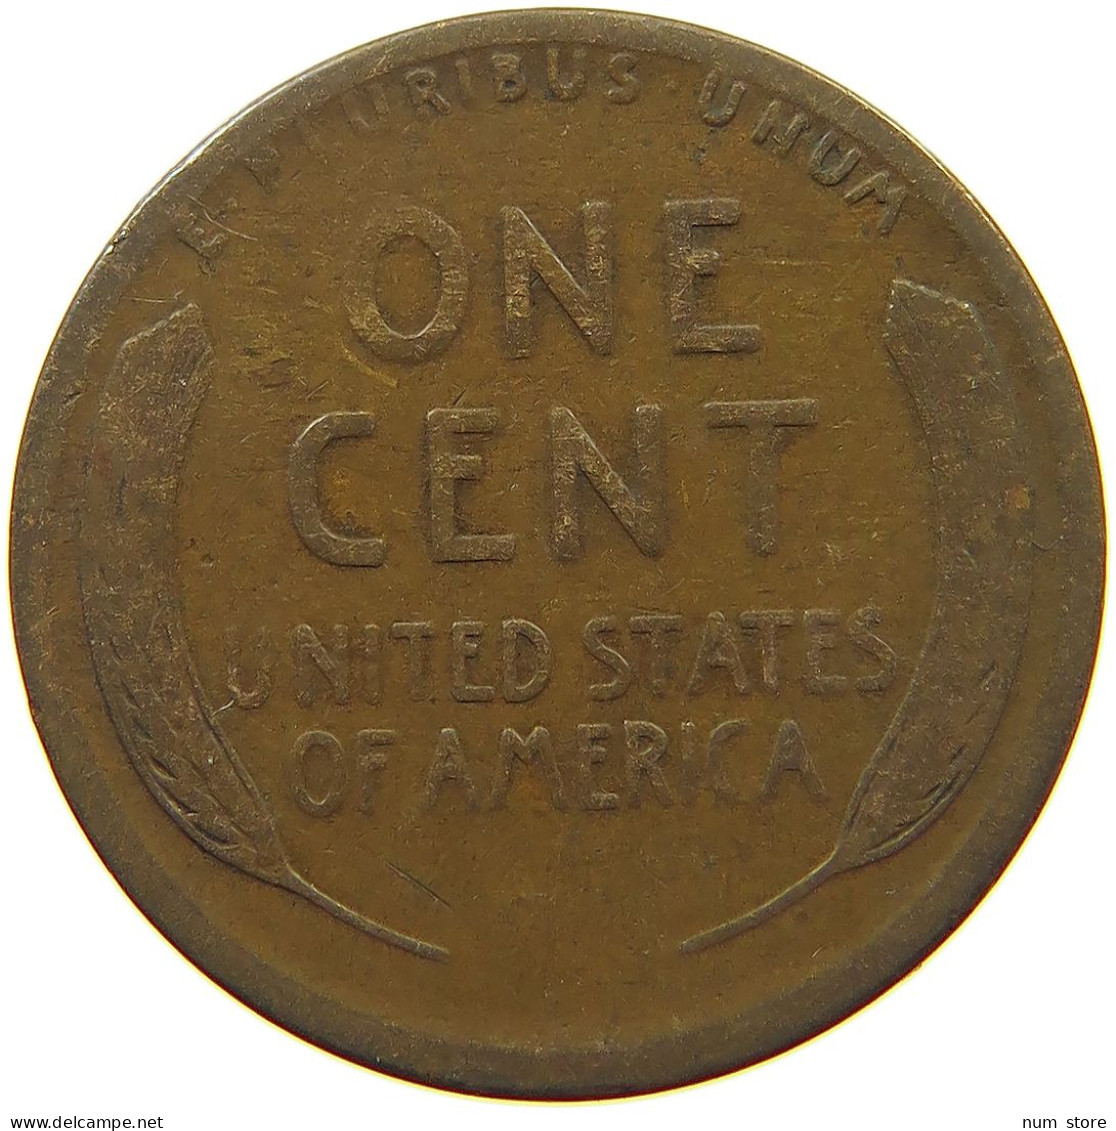 UNITED STATES OF AMERICA CENT 1916 S Lincoln Wheat #s063 0843 - 1909-1958: Lincoln, Wheat Ears Reverse